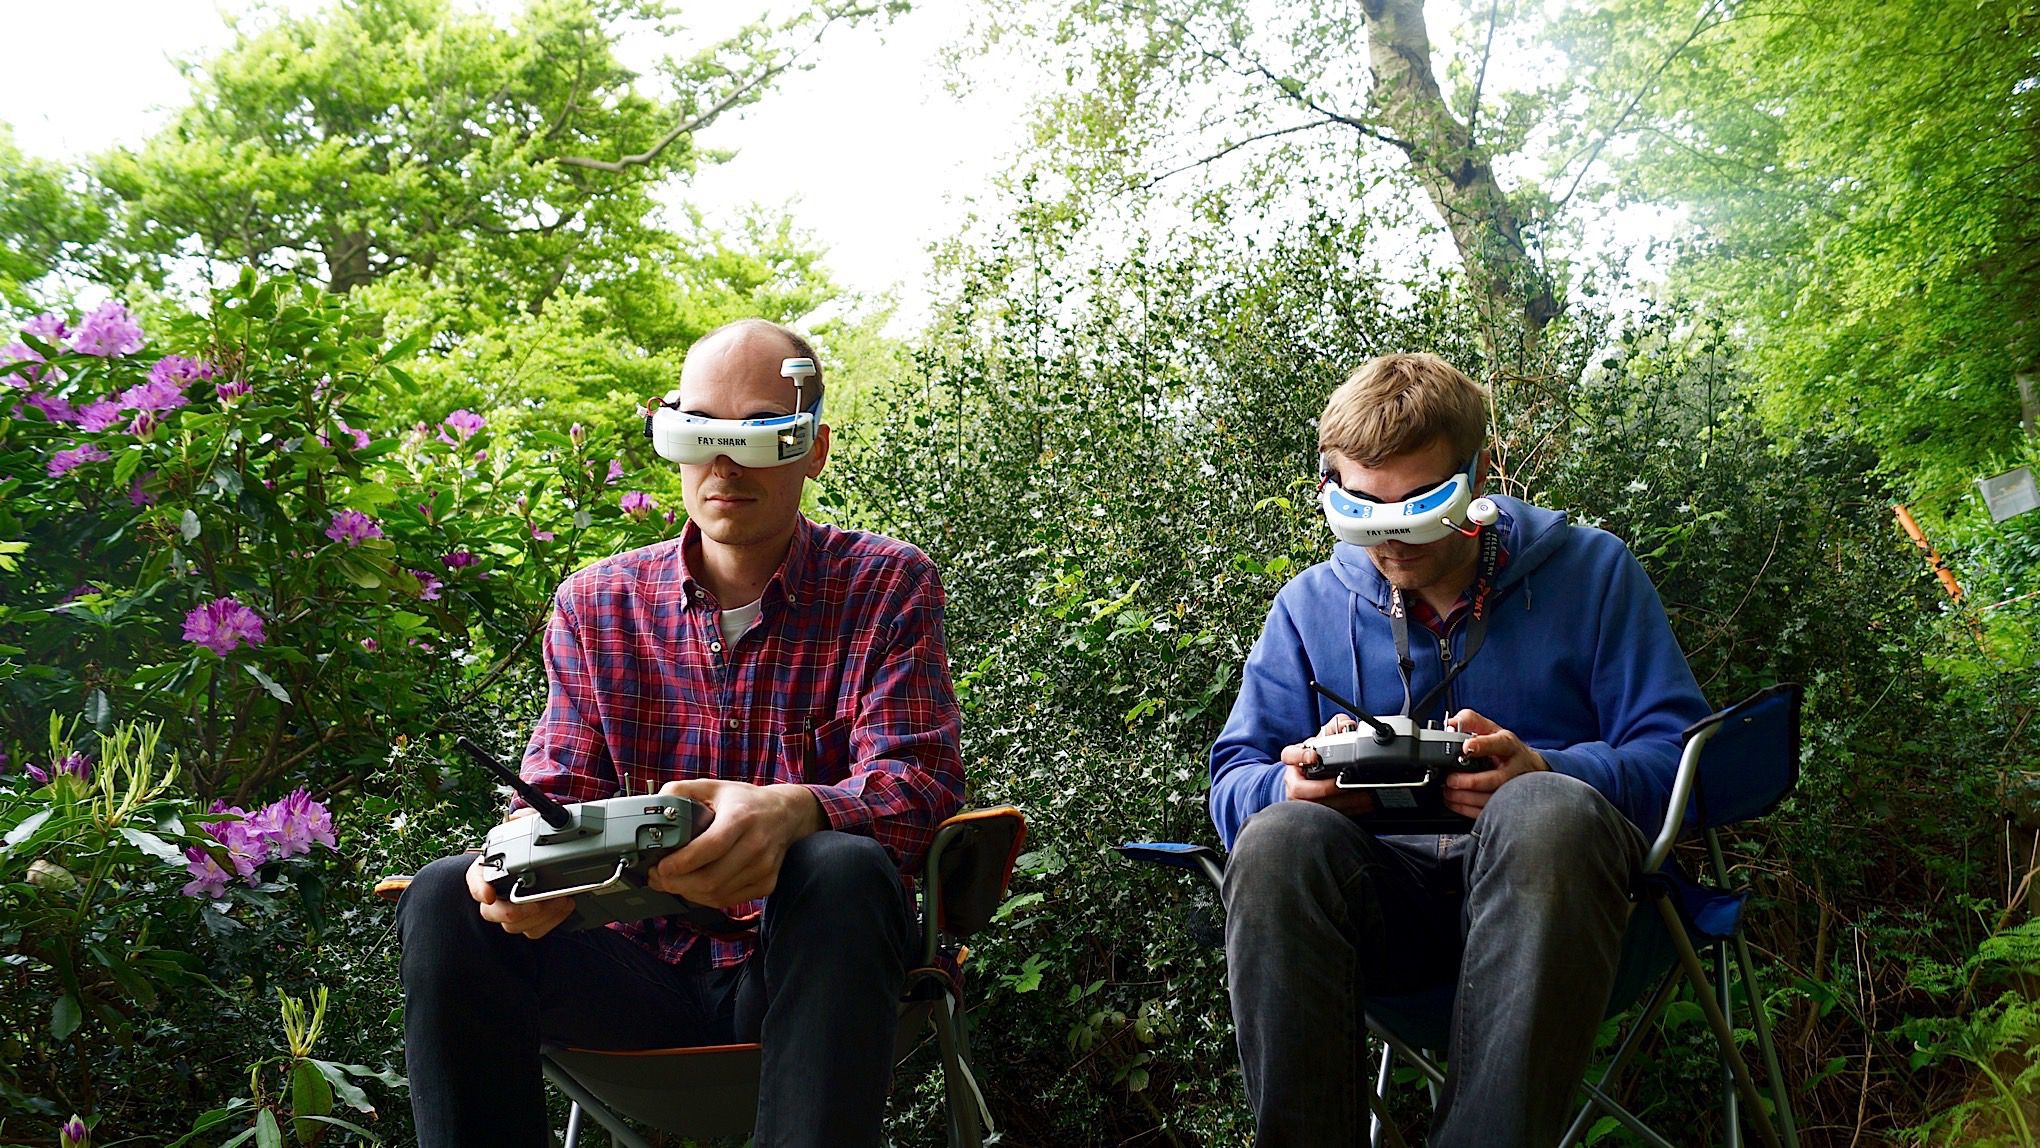 Is Racing Drones Through a Forest The Sport of The Future?